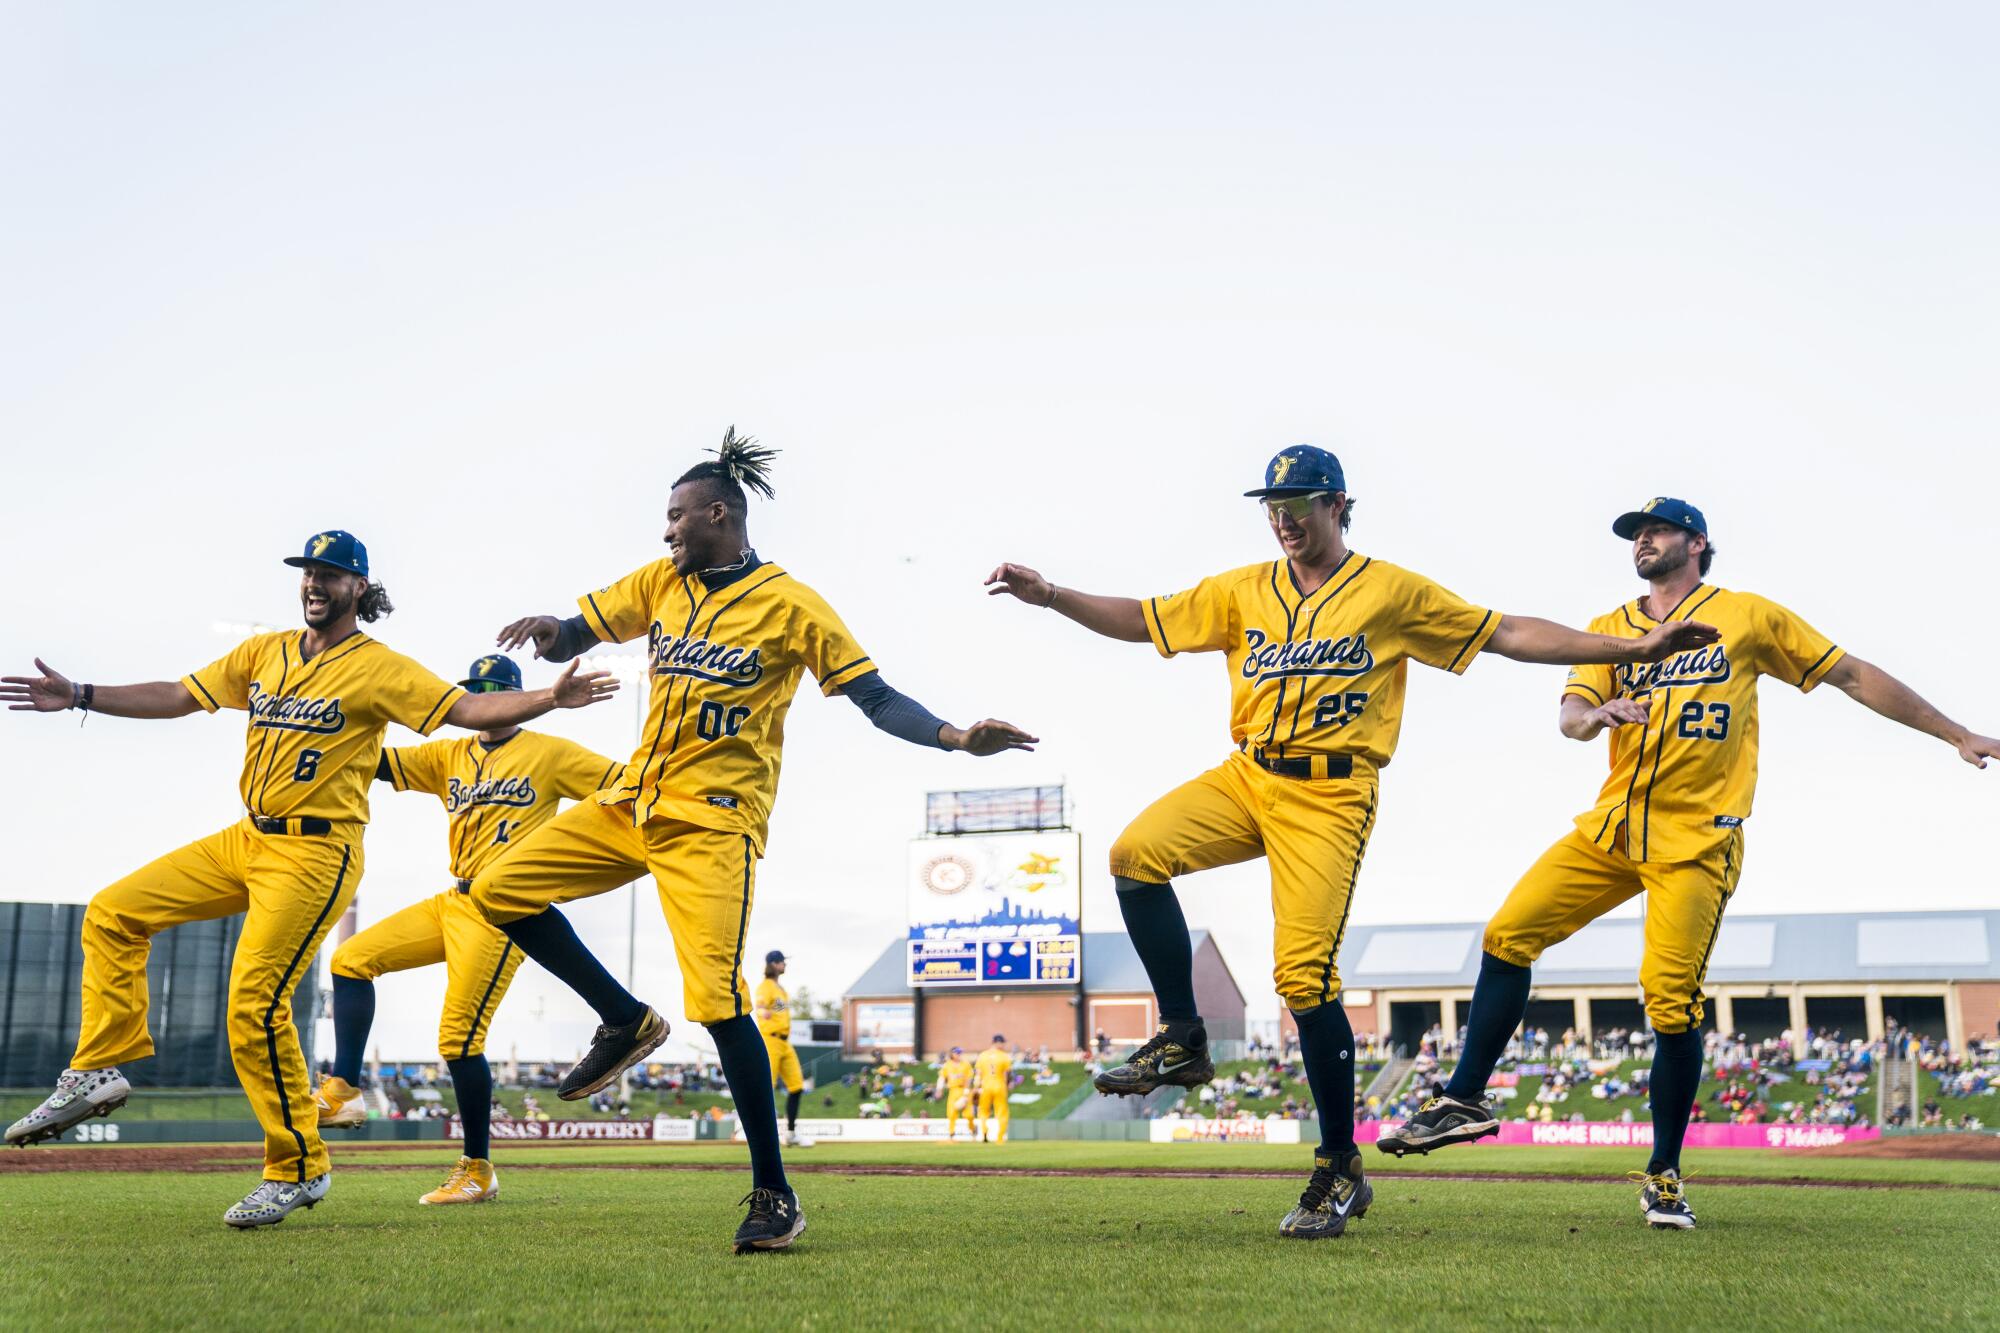 Meet the Savannah Bananas, who wow fans and have MLB's attention Los